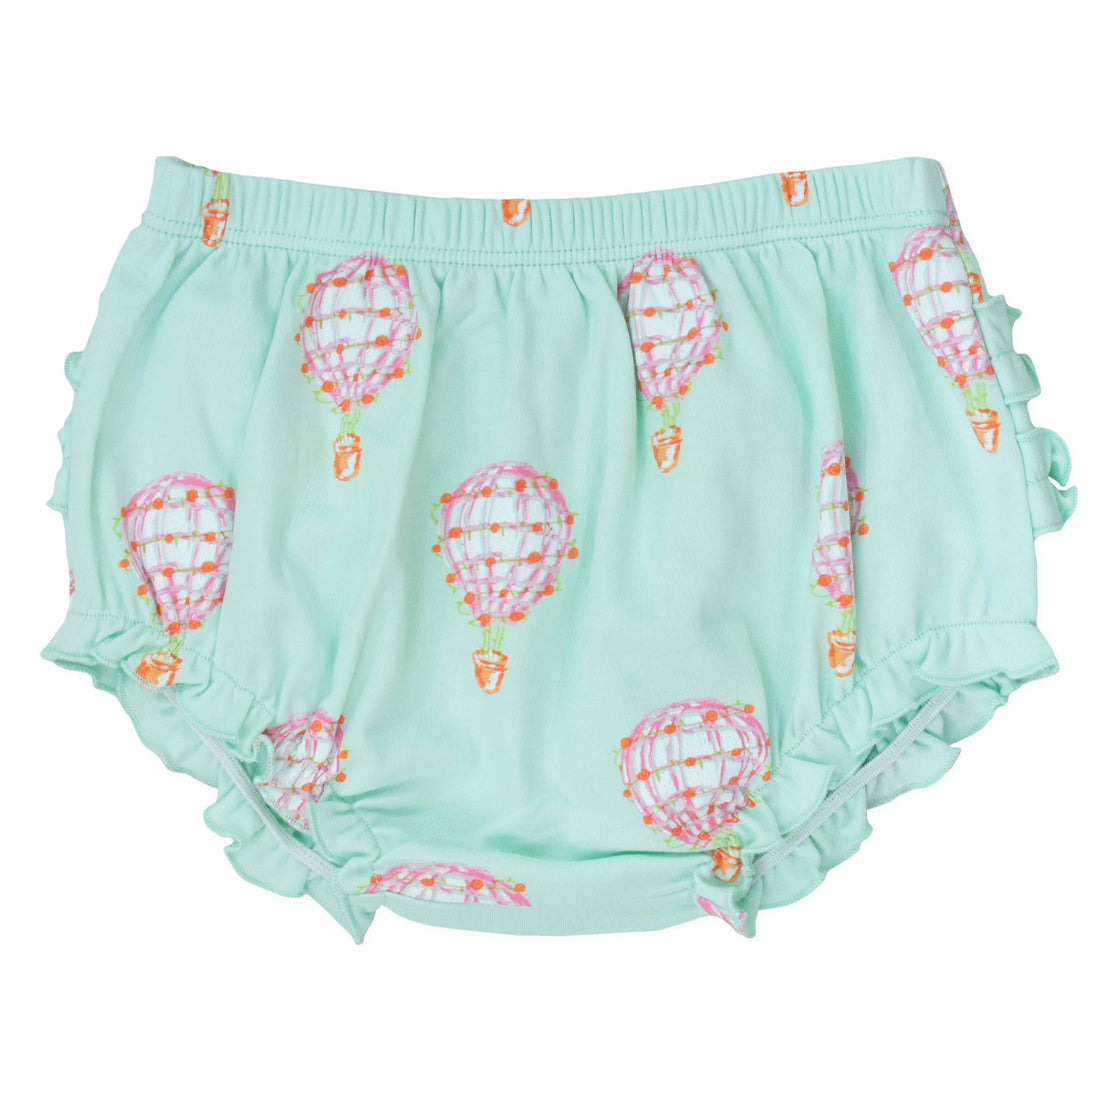 pink girls bloomer with hot air balloon pattern made in pima cotton